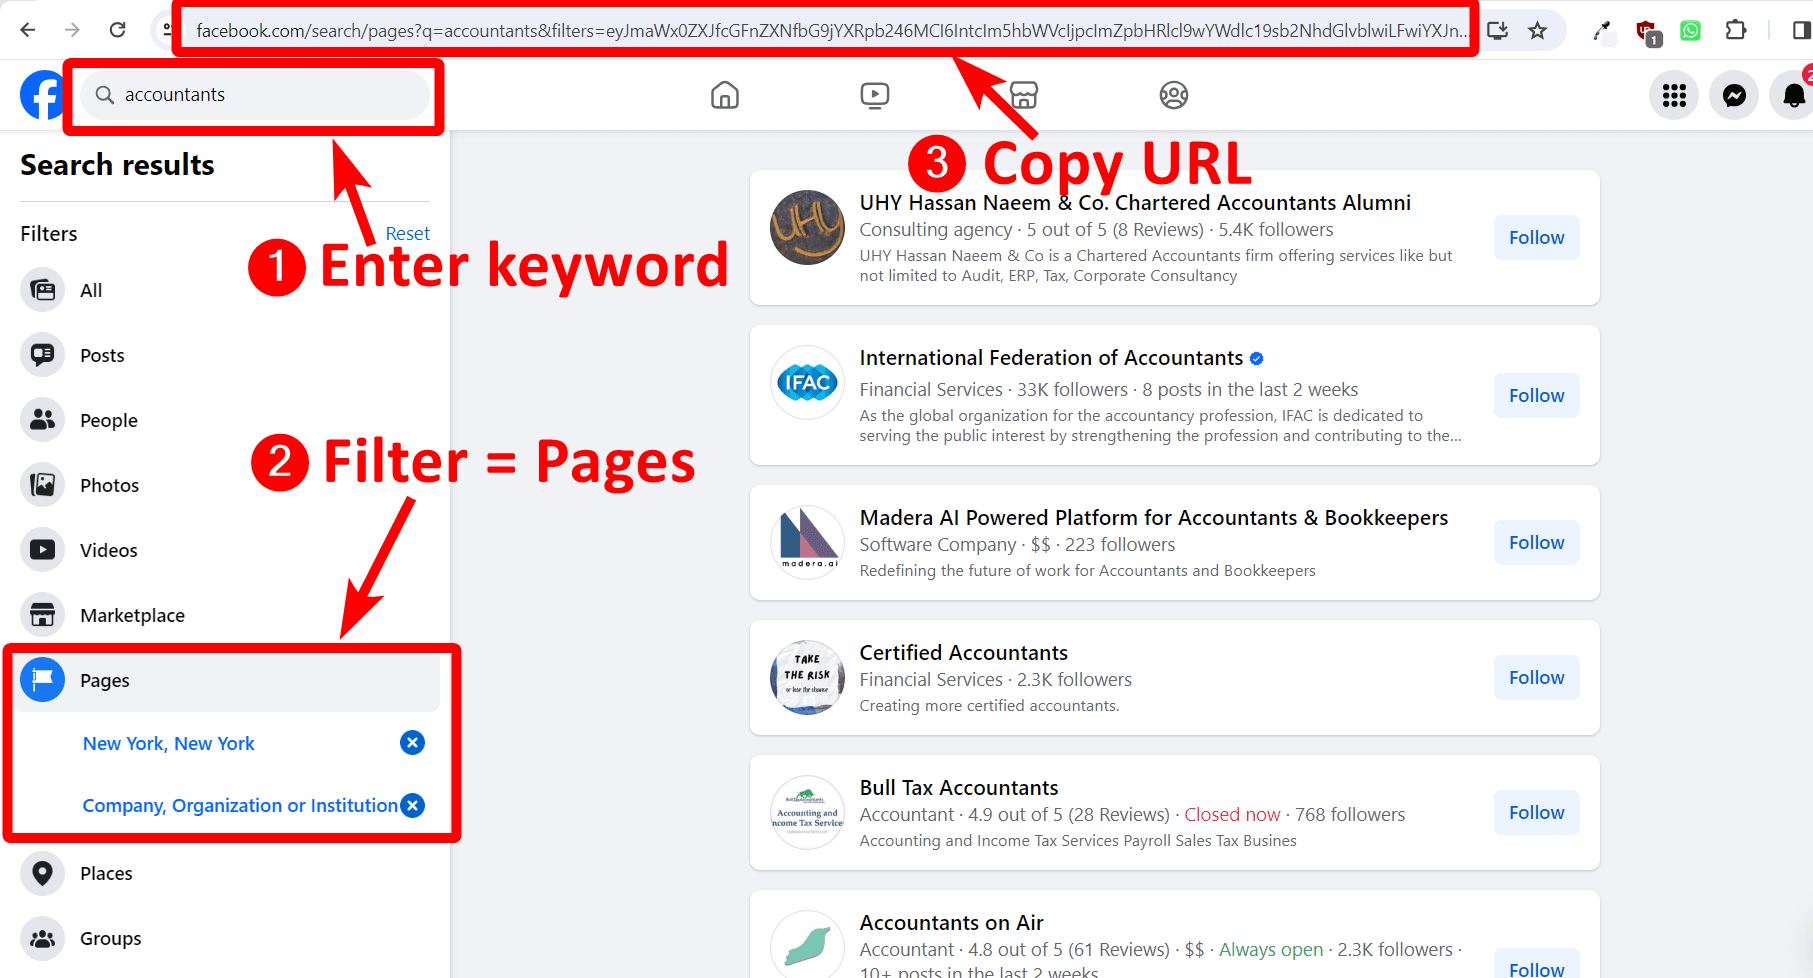 get facebook search url - image21.png